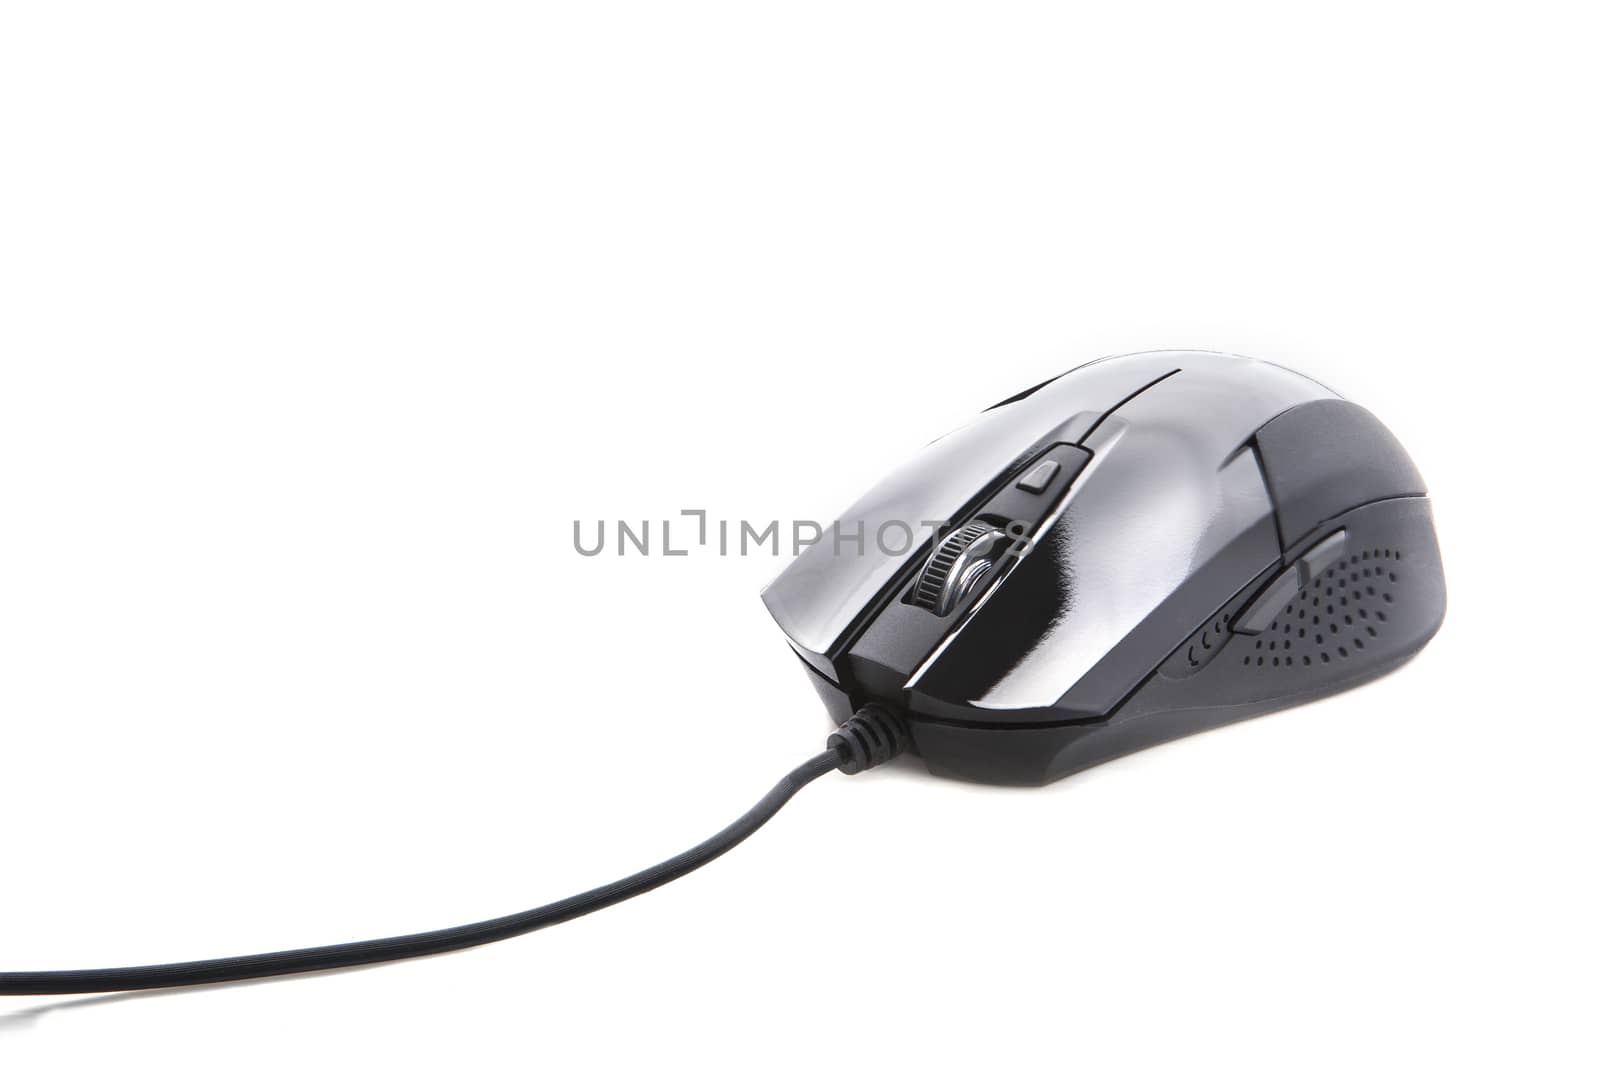 black playing game computer mouse on white backgroundd use for multipurpose technology object